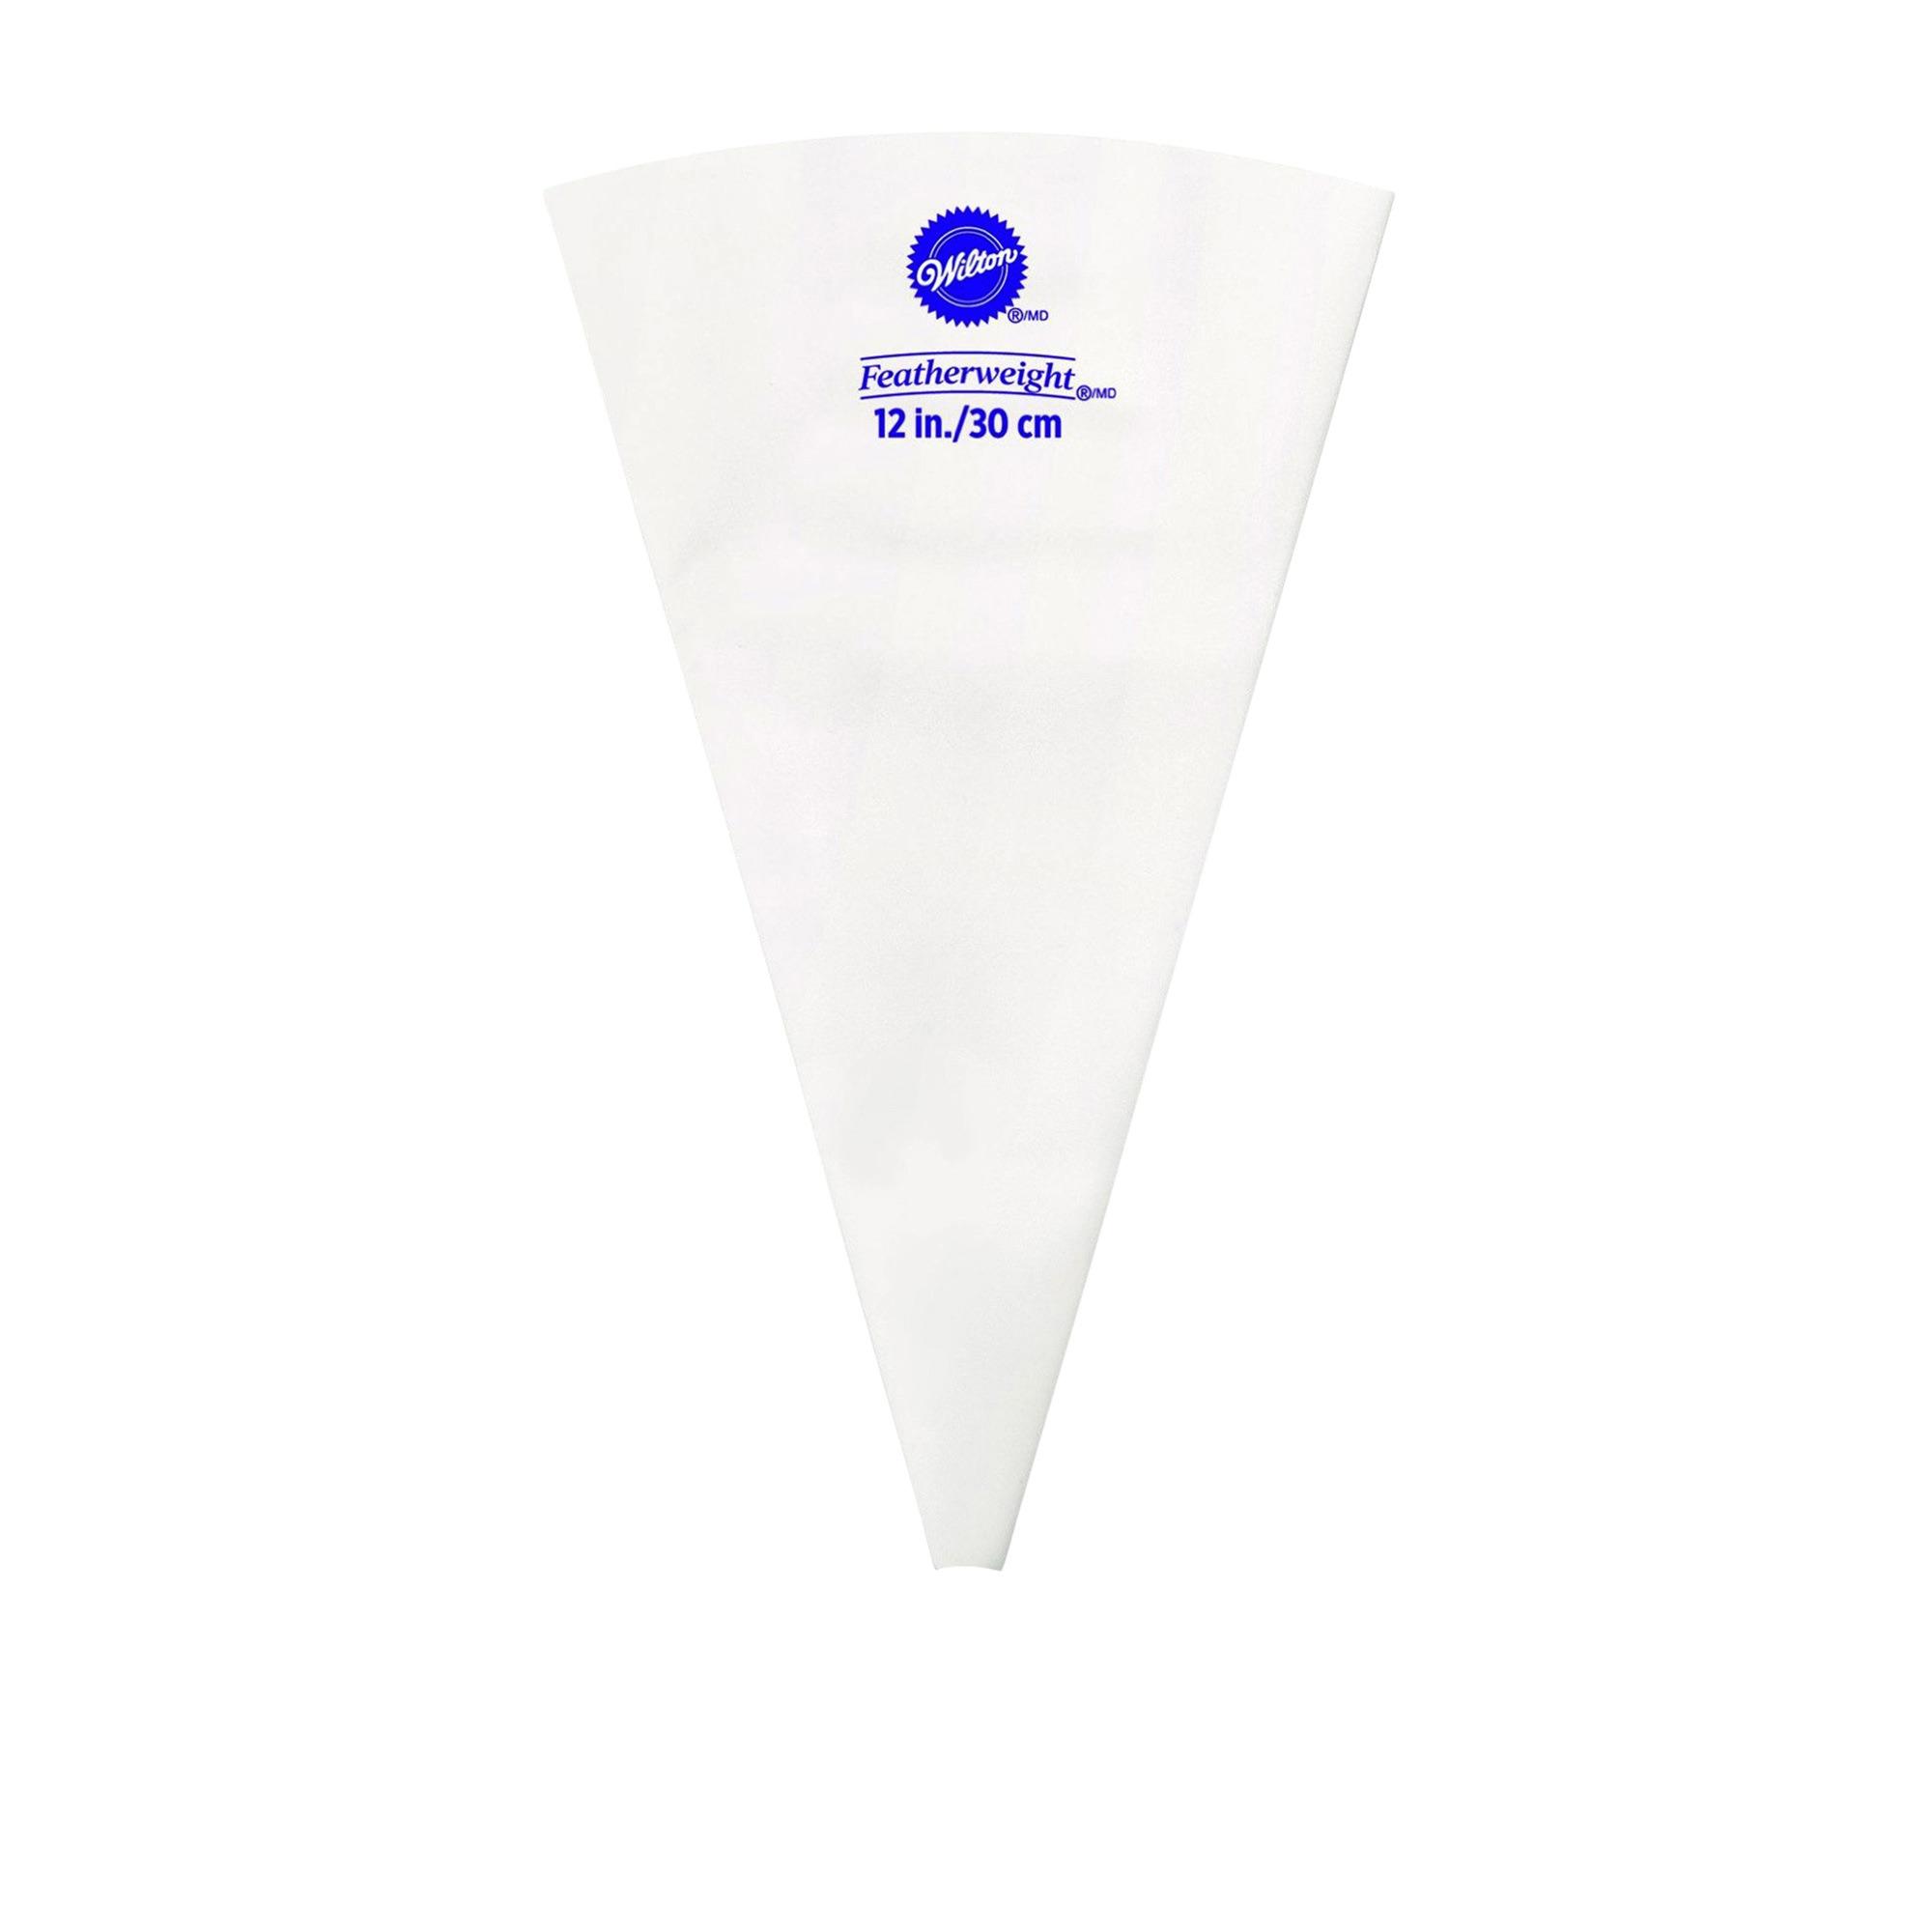 Wilton Featherweight Piping Bag 30cm Image 1